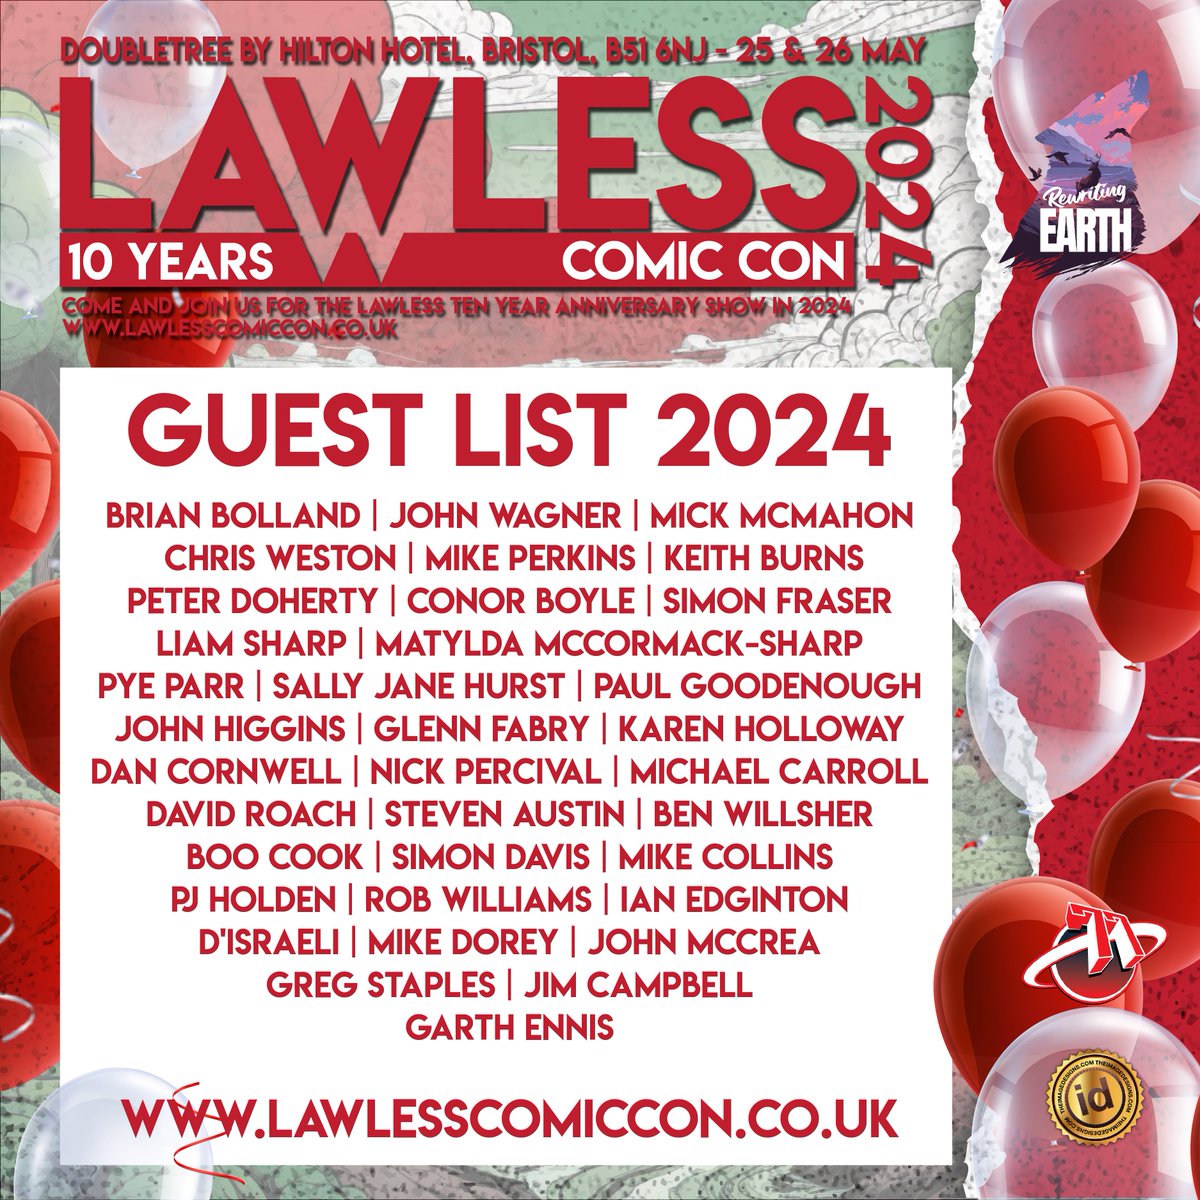 Hugely excited to announce that @GarthEnnis will be joining us for the Lawless 10th Anniversary this year!!!!